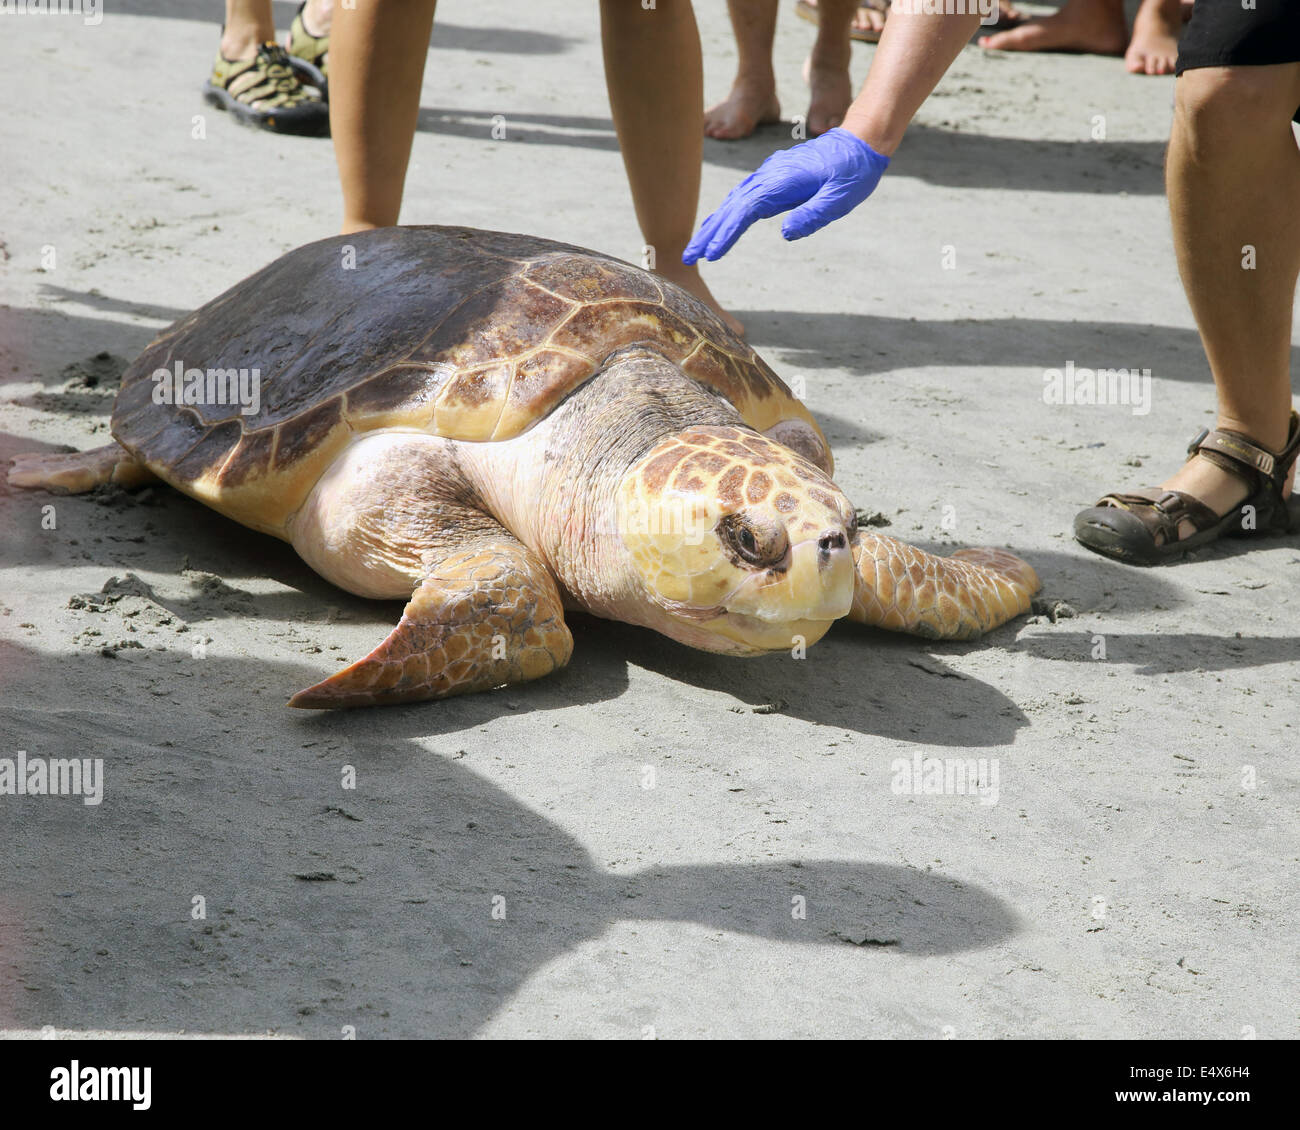 South Carolina, US. 15th July, 2014. Briar the Sea turtle set free after just over a year of being nursed back to health by the South Carolina Aquarium Sea Turtle  Rescue program. She was found on May 30th 2013, extremely undeweight, with poor bloodworks and had developed cataracts. After surgery and weeks of nursing at the program she was finally well enough to be set free on July 15th 2014 Credit:  brian jordan/Alamy Live News Stock Photo